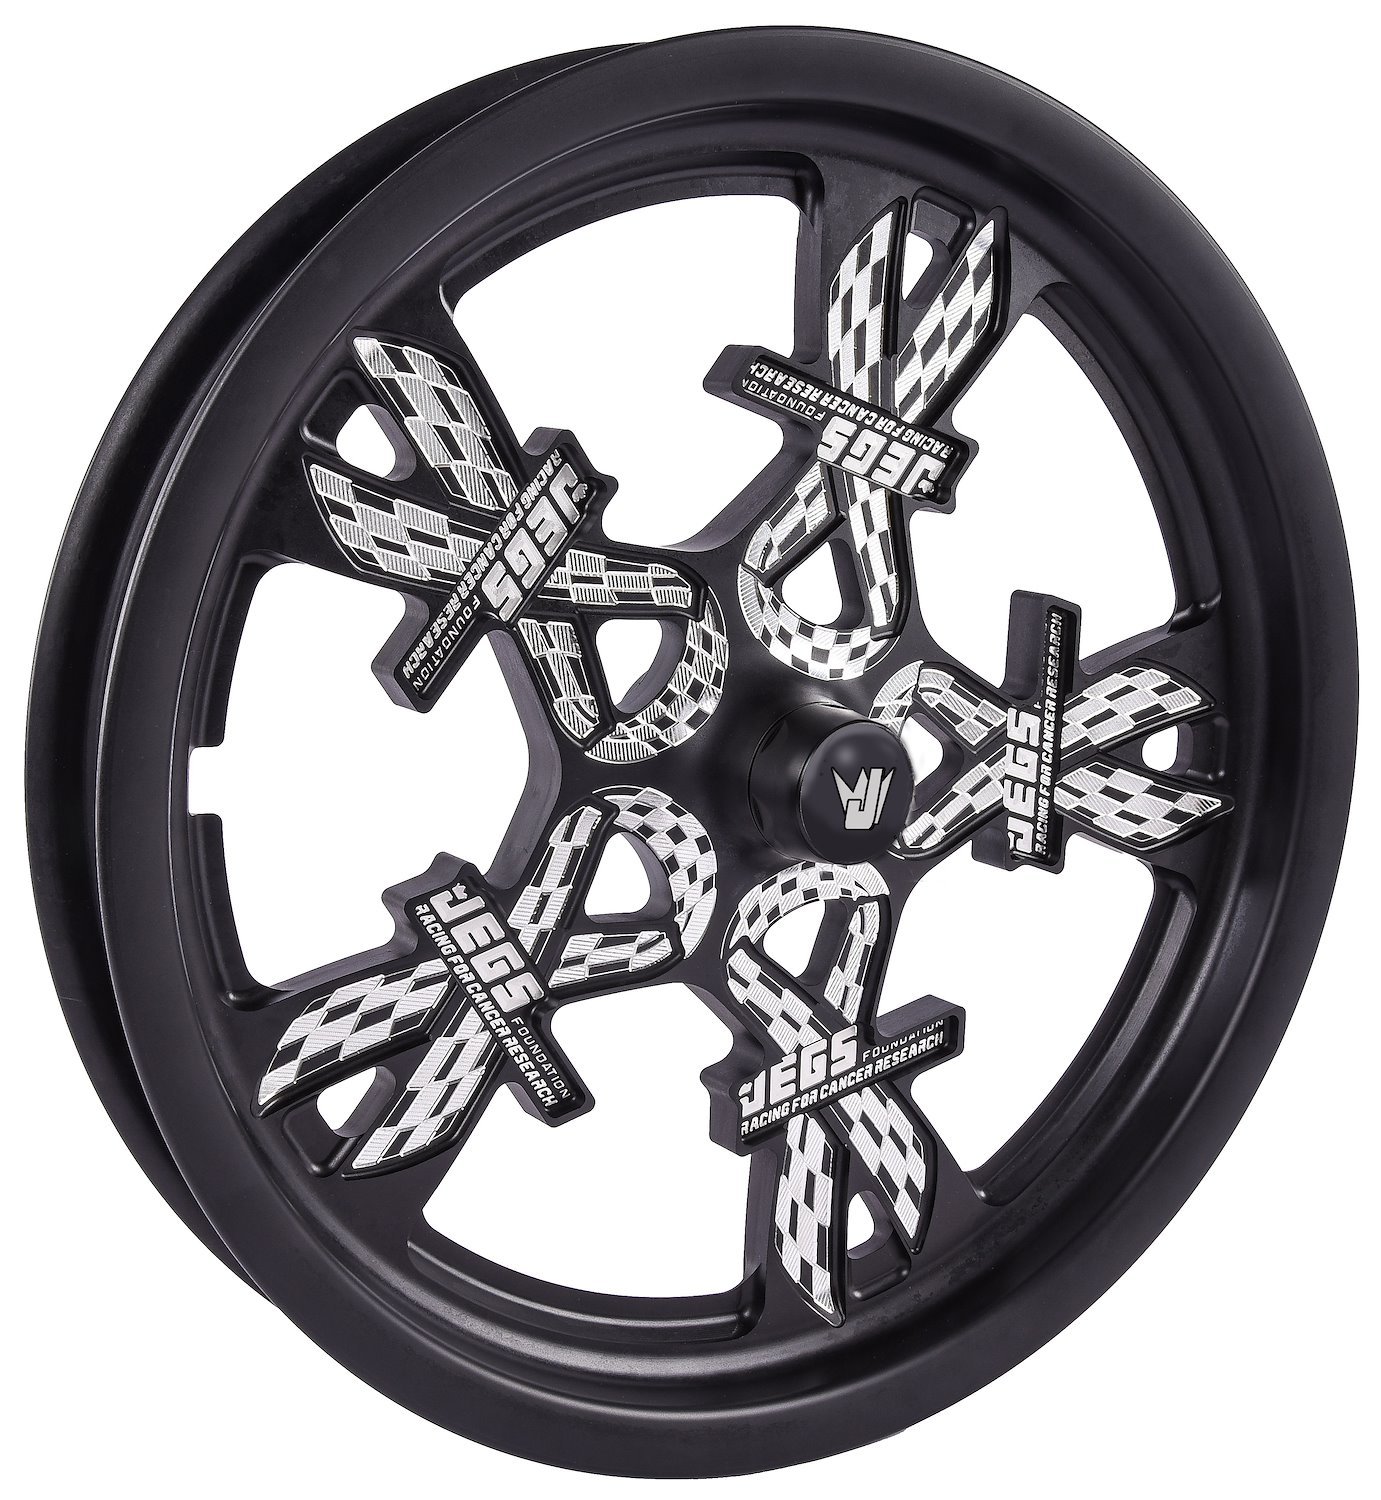 JEGS Cancer Foundation Ribbon Pro Forged Wheel Size: